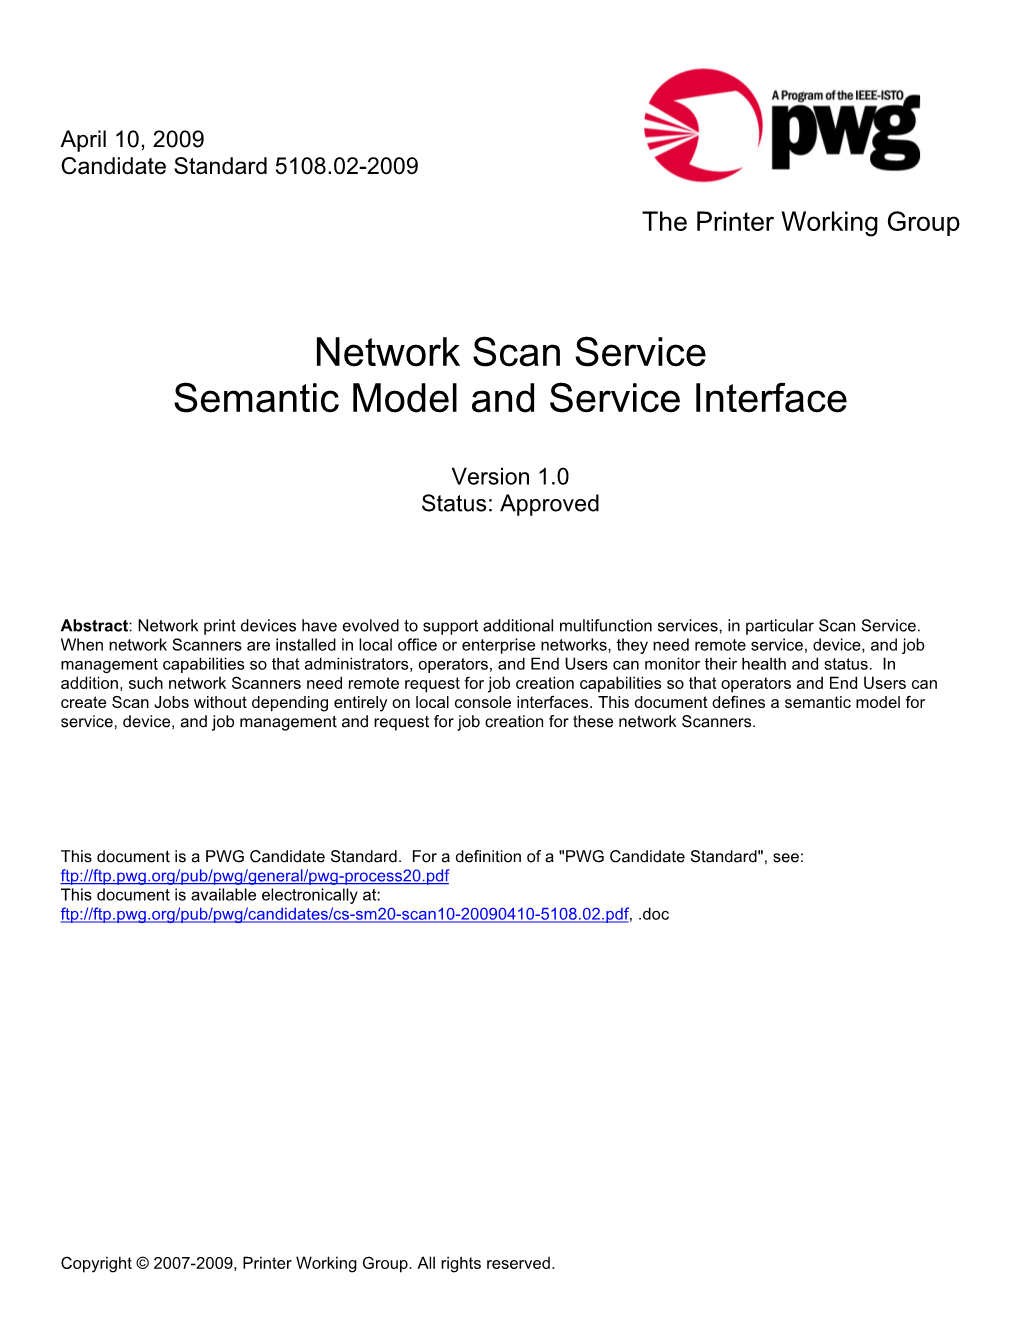 Network Scan Service Semantic Model and Service Interface